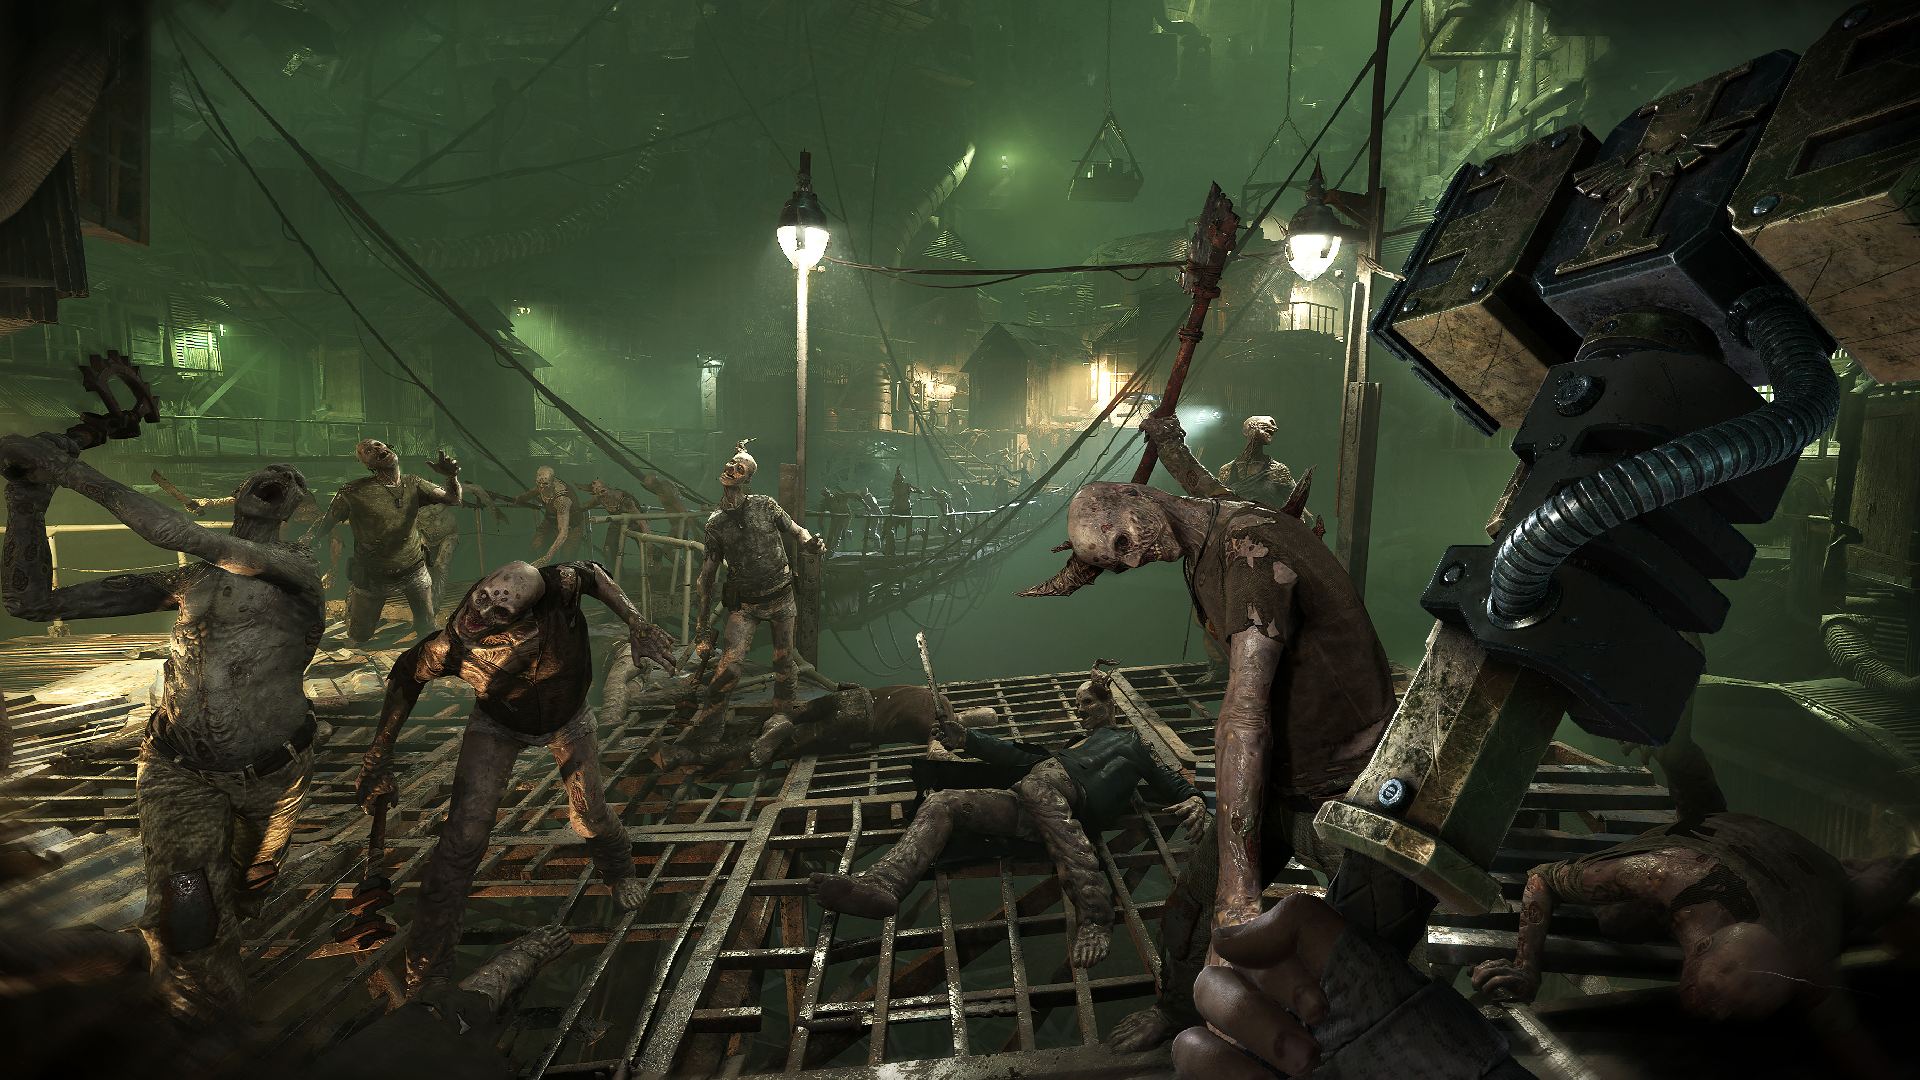 Warhammer 40,000 Darktide PvE Horde Slayer Gameplay: The player can be seen holding a weapon